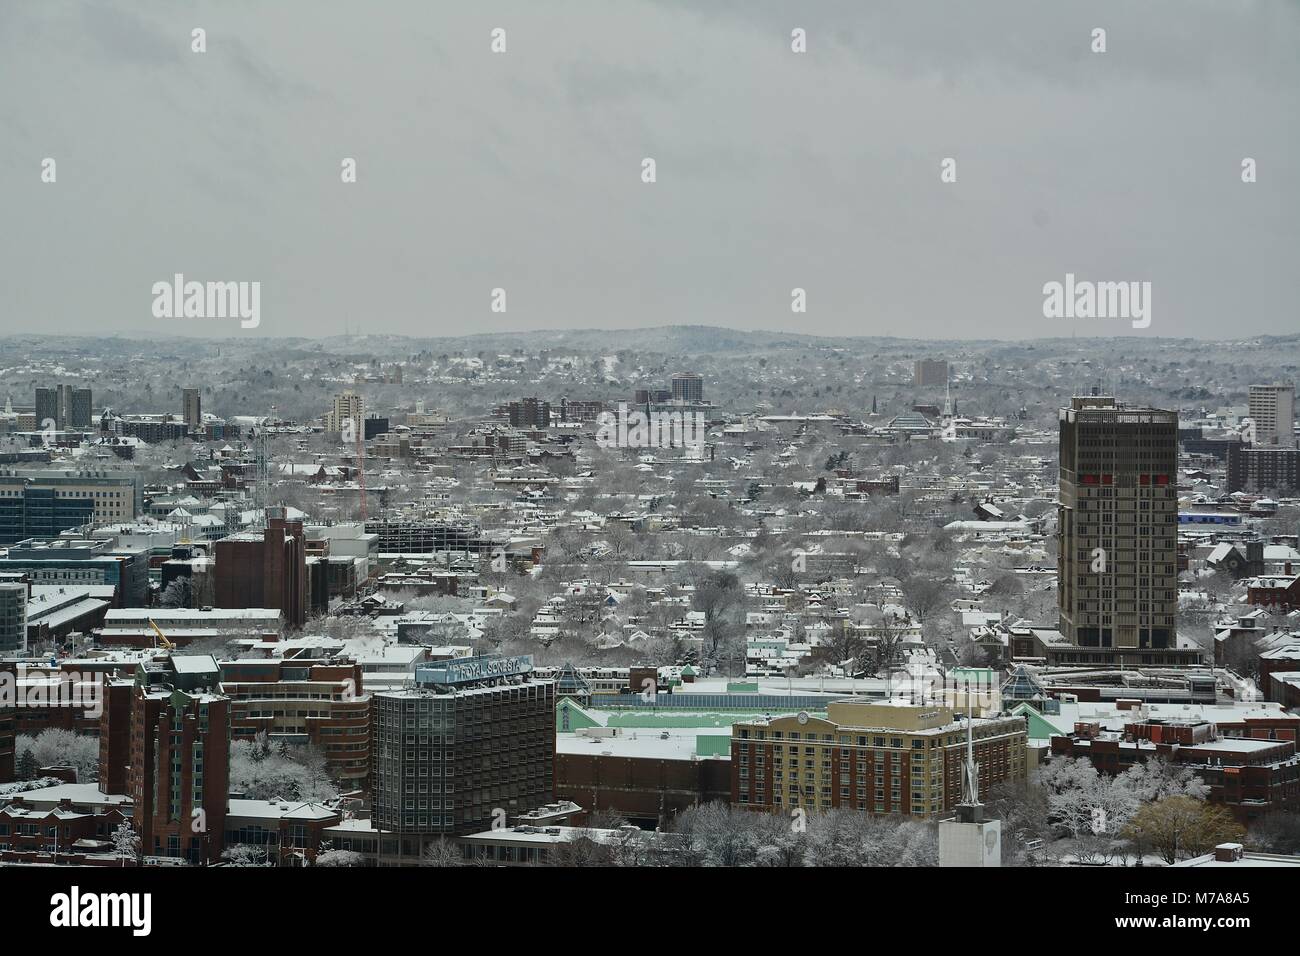 A snow covered Boston seen from above after a Winter Nor'Easter.  Boston, Massachusetts, U.S.A. Stock Photo